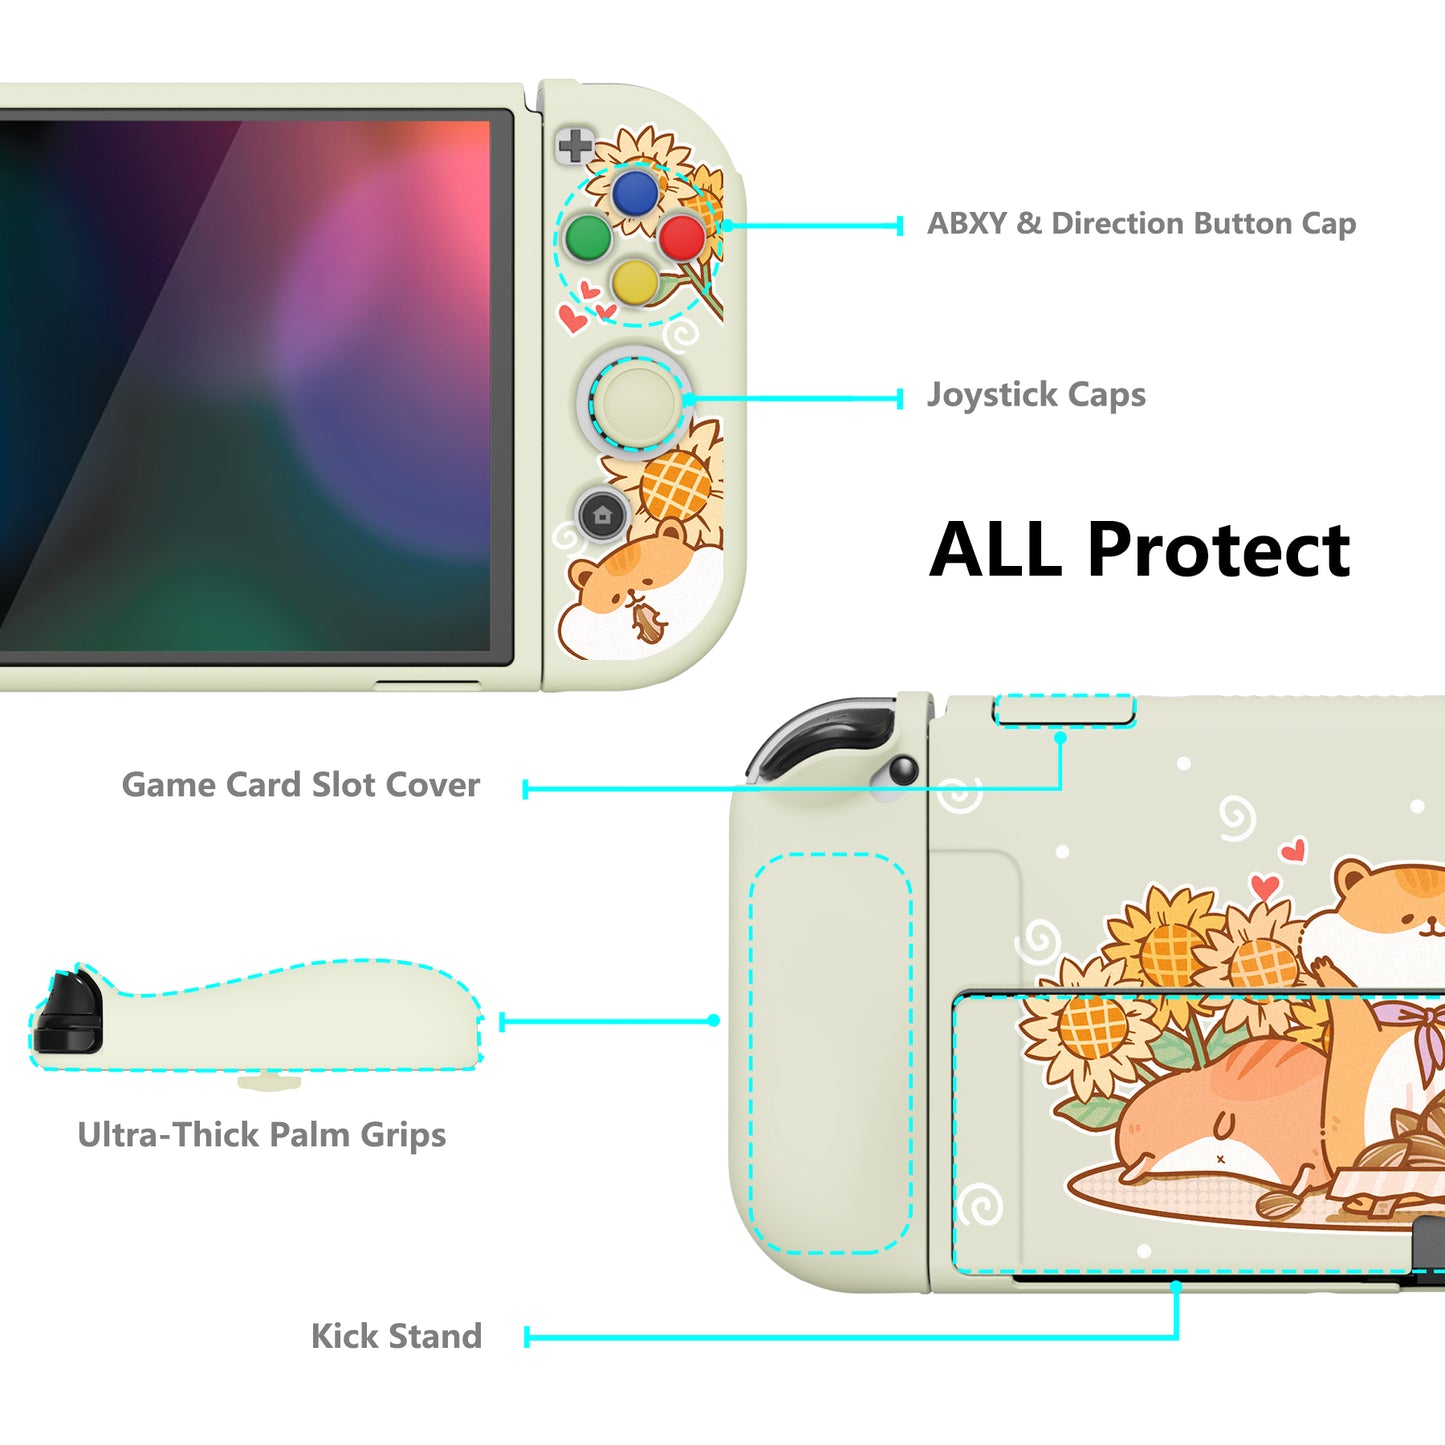 PlayVital ZealProtect Soft Protective Case for Switch OLED, Flexible Protector Joycon Grip Cover for Switch OLED with Thumb Grip Caps & ABXY Direction Button Caps - Hamster & Sunflower - XSOYV6018 playvital